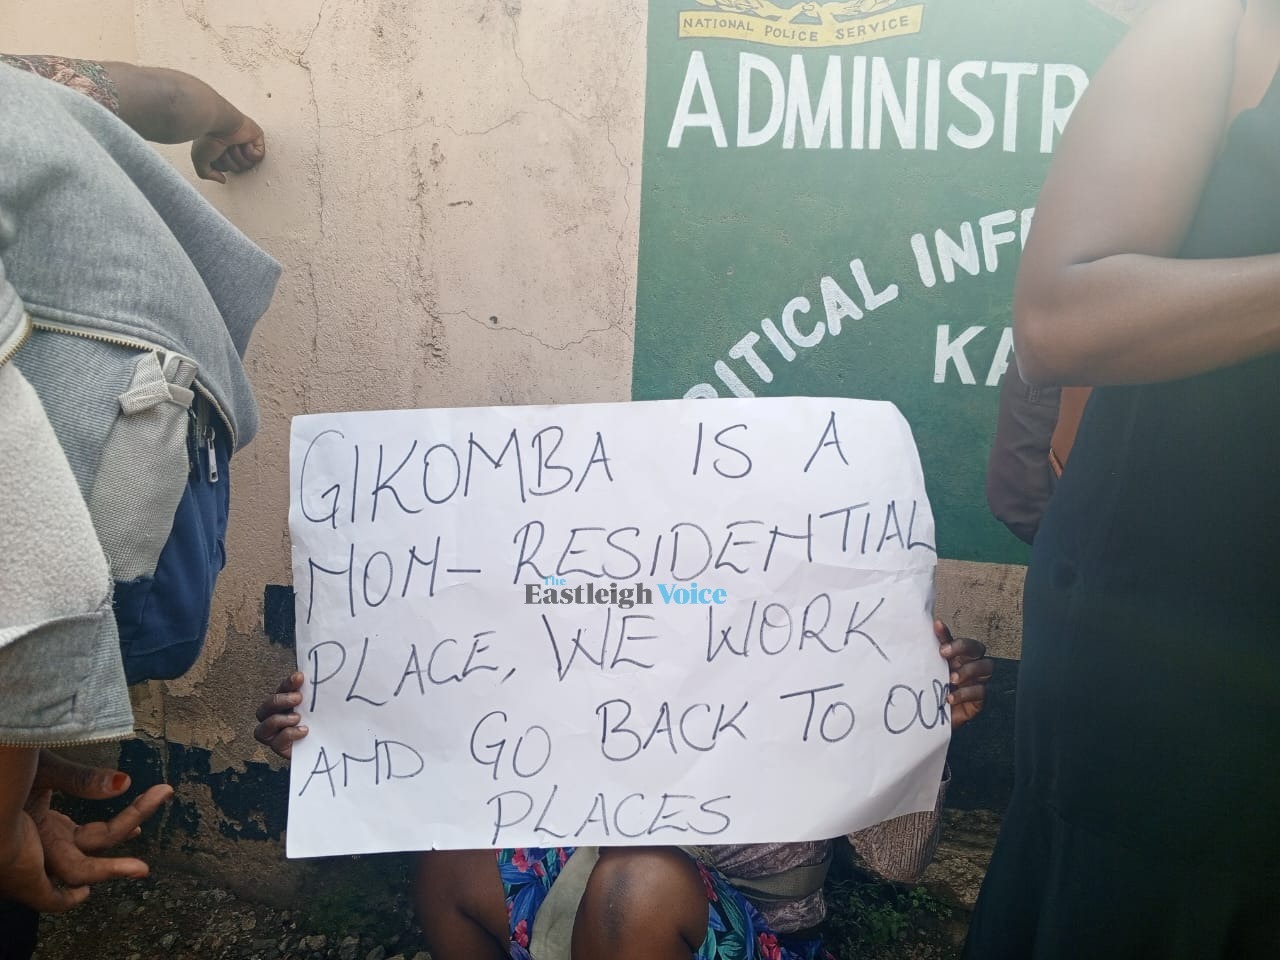 Gikomba traders protest looming demolition of structures along Nairobi River